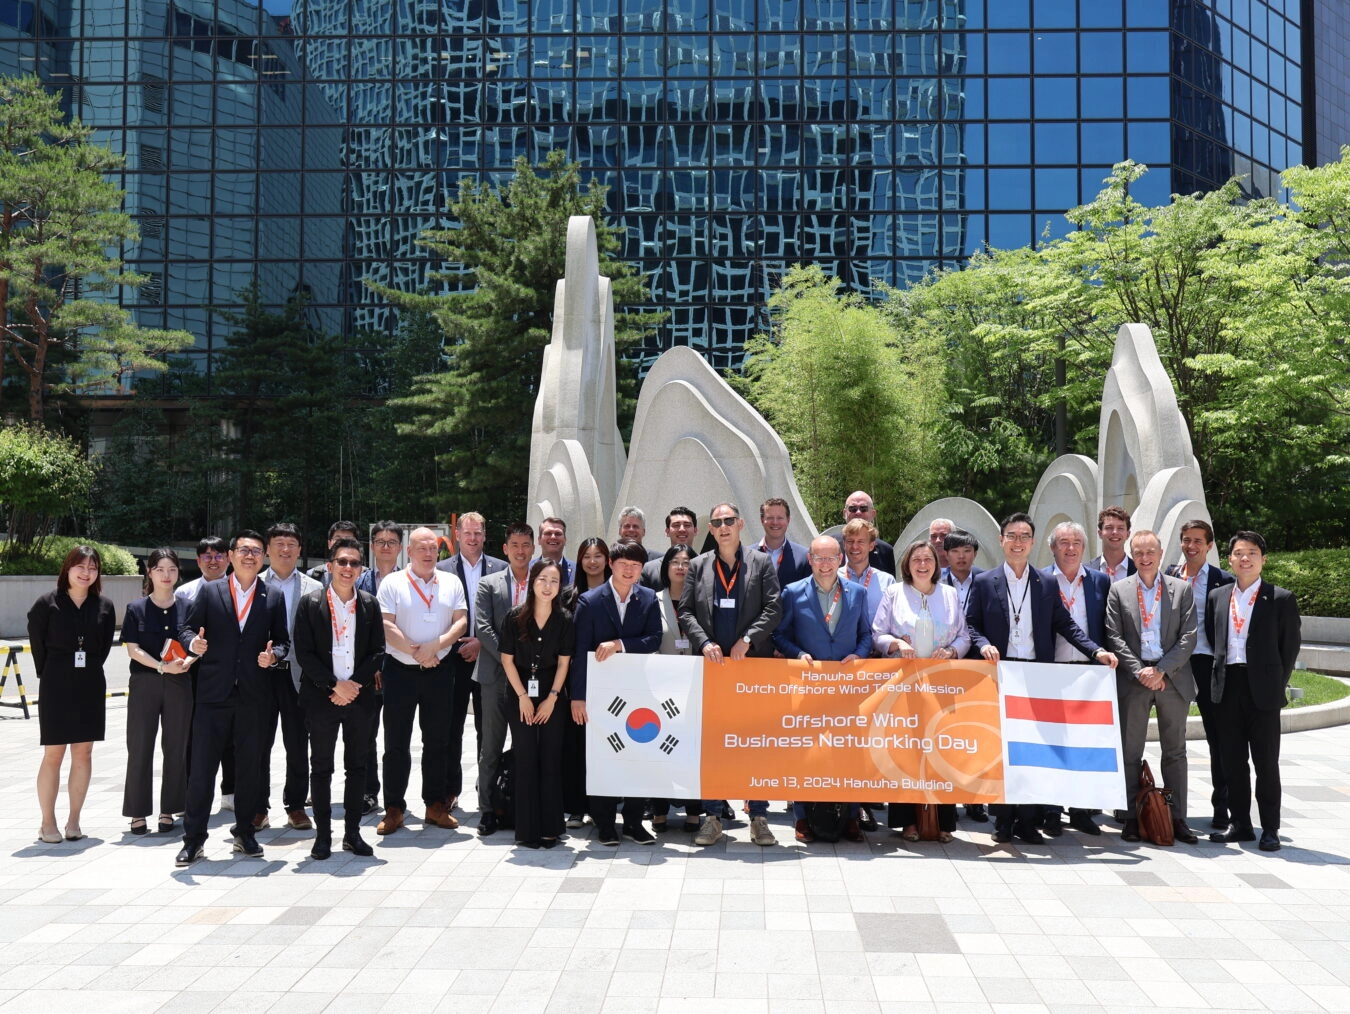 TWD participated in the Dutch Offshore Wind Trade Mission to South Korea